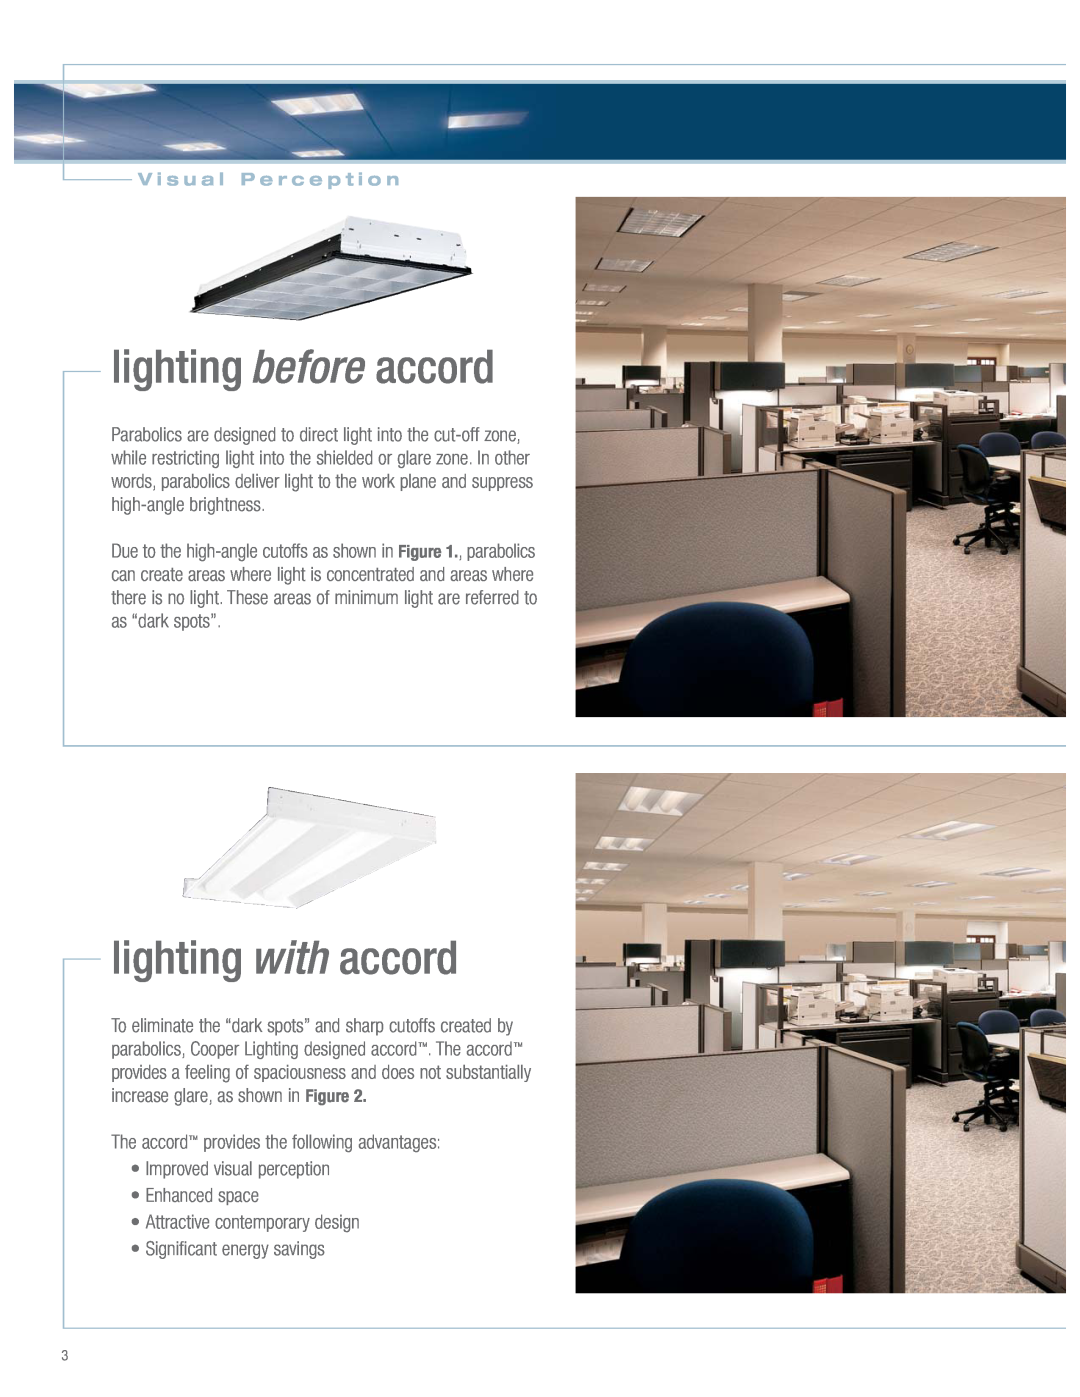 Cooper Lighting Accord Series lighting before accord, lighting with accord, The accordTM provides the following advantages 